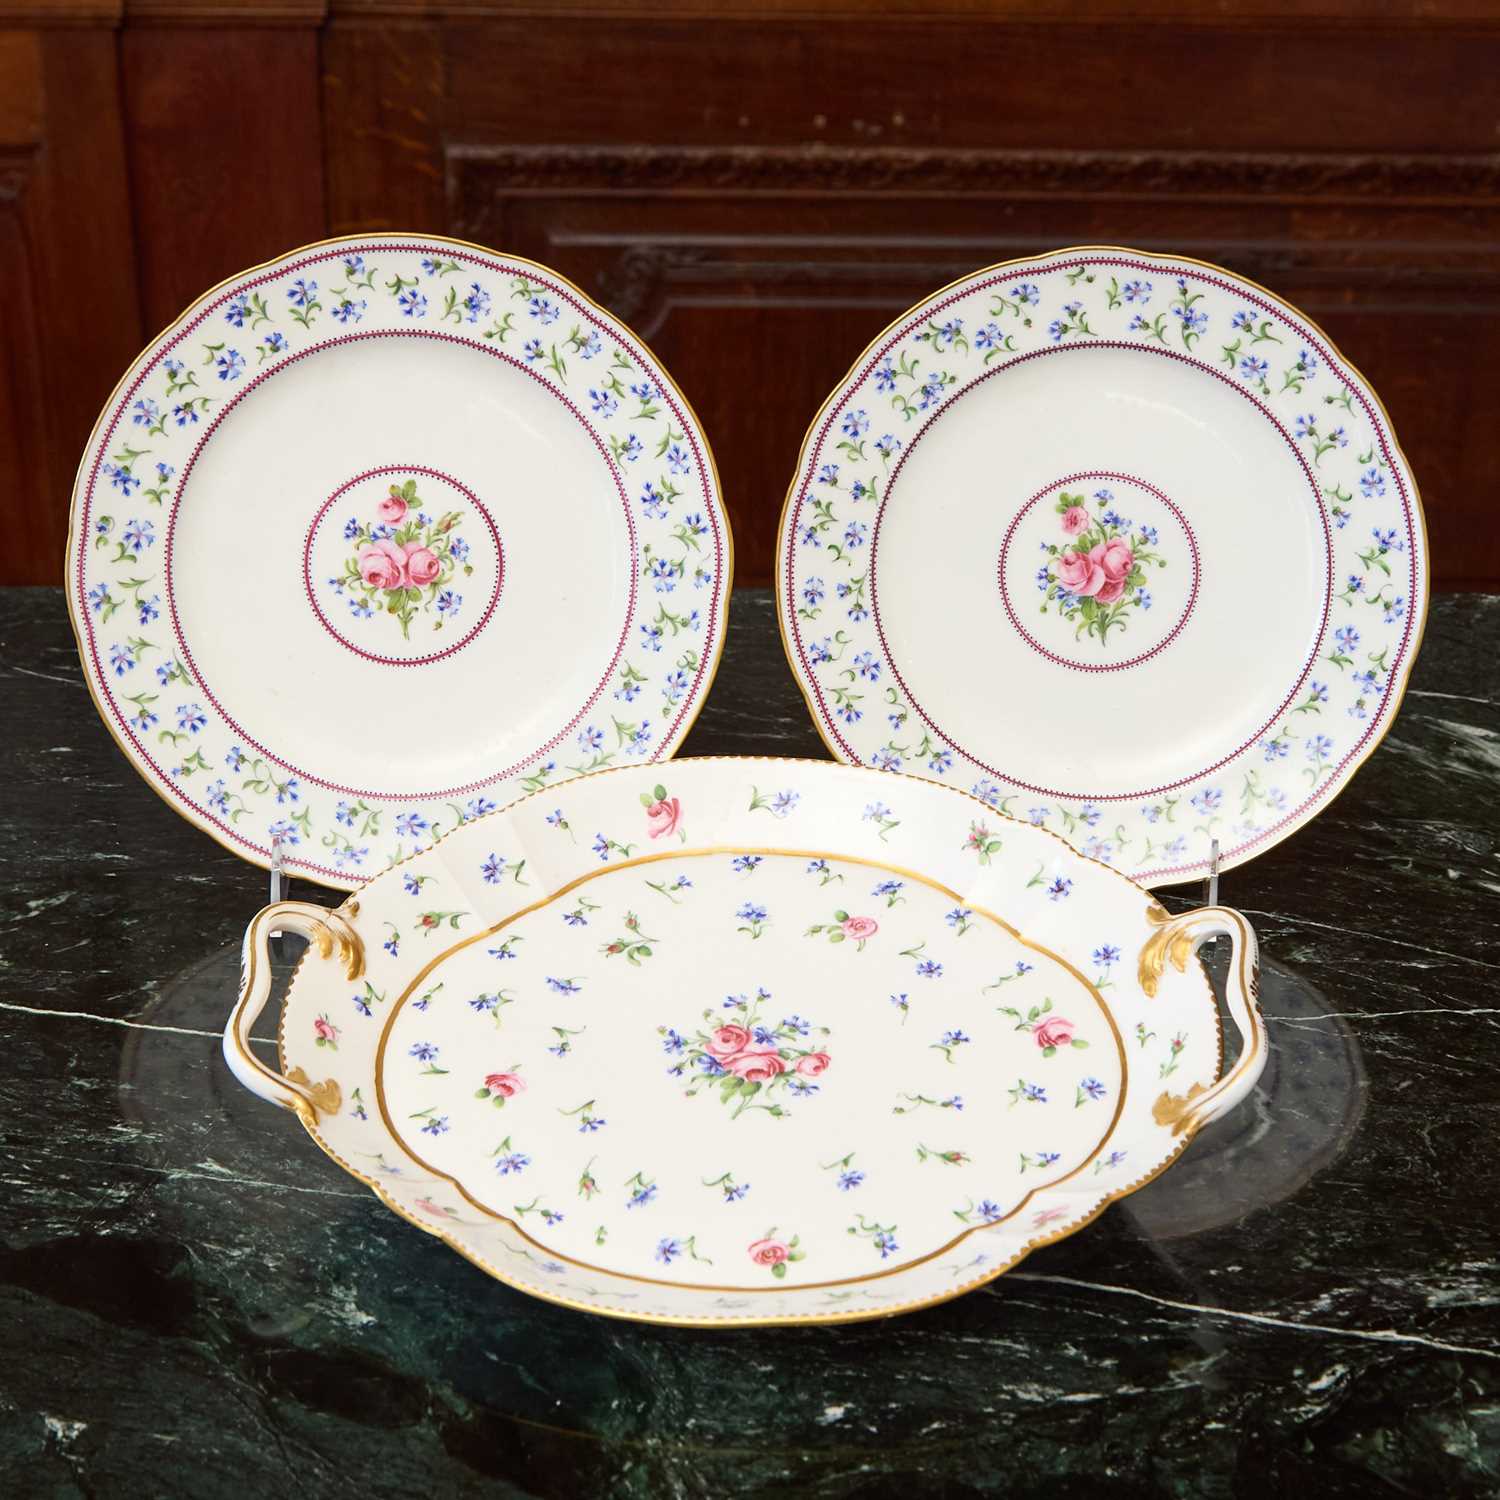 Lot 511 - TWO SEVRES PORCELAIN PLATES (ASSIETTE UNIE) AND A TWO-HANDLED TRAY (PLATEAU HEBERT A ANSES)